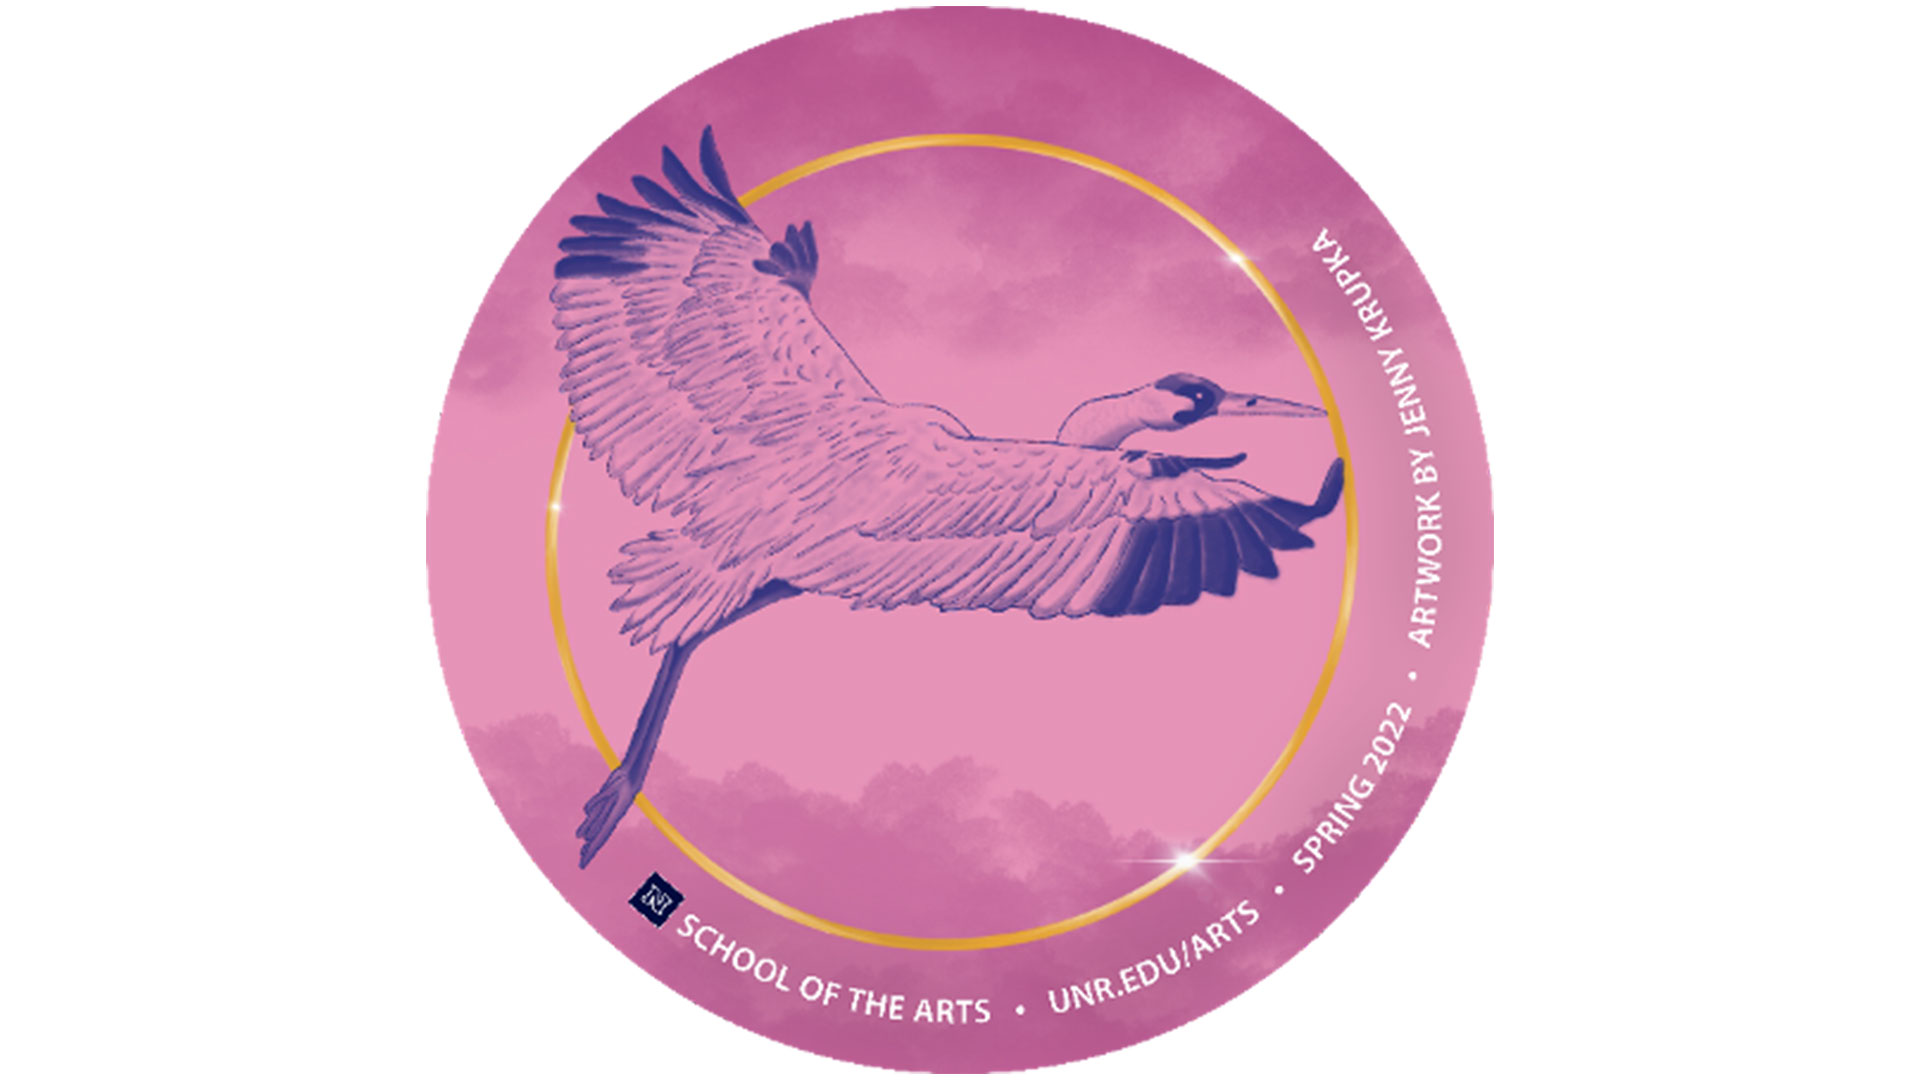 Spring 2022 Sticker featuring drawing of crane flying in clouds